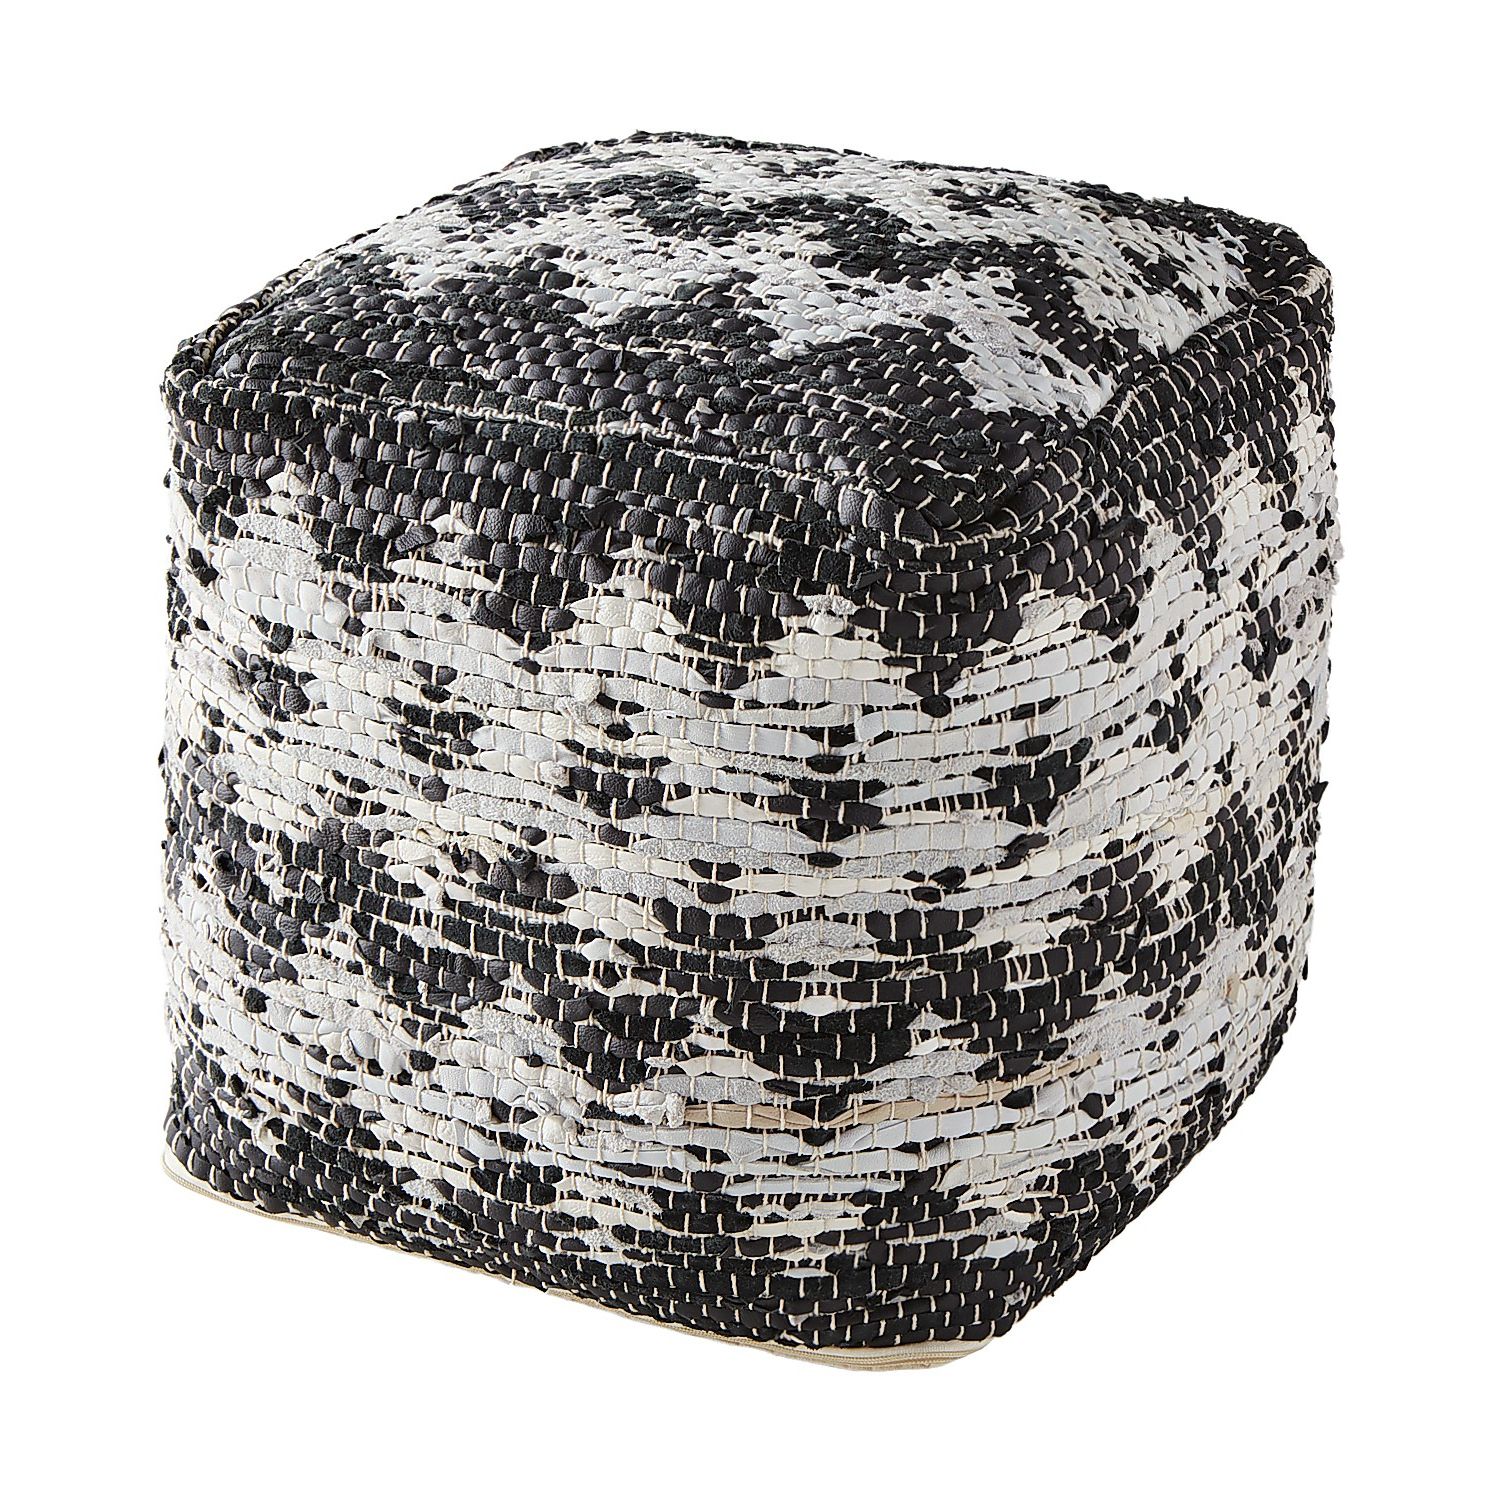 Favorite Black & White Woven Pouf – Pier1 For Dark Red And Cream Woven Pouf Ottomans (View 6 of 10)